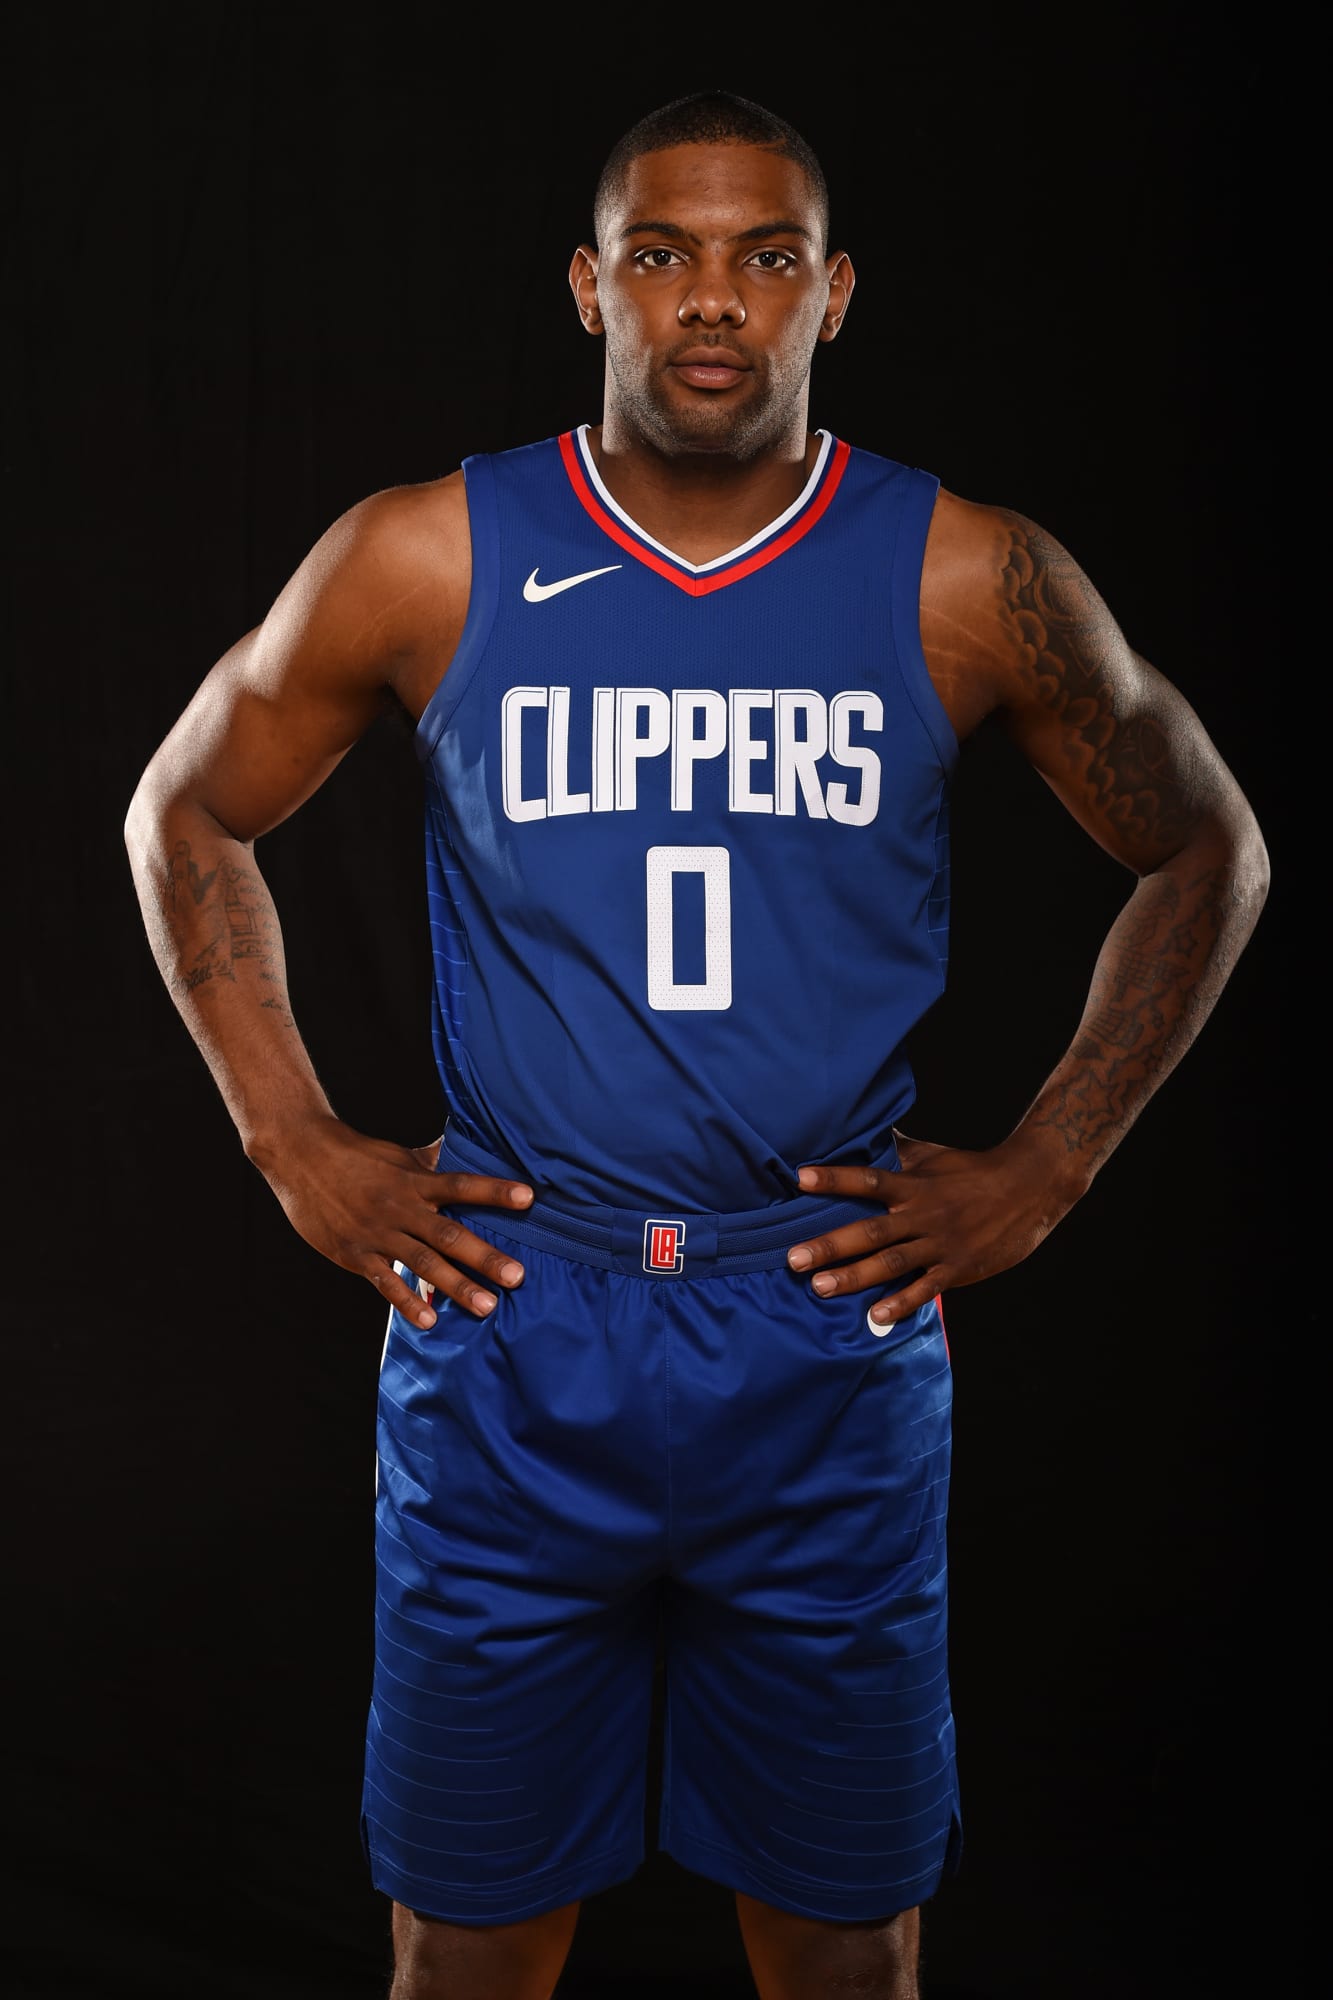 la clippers nautical jersey